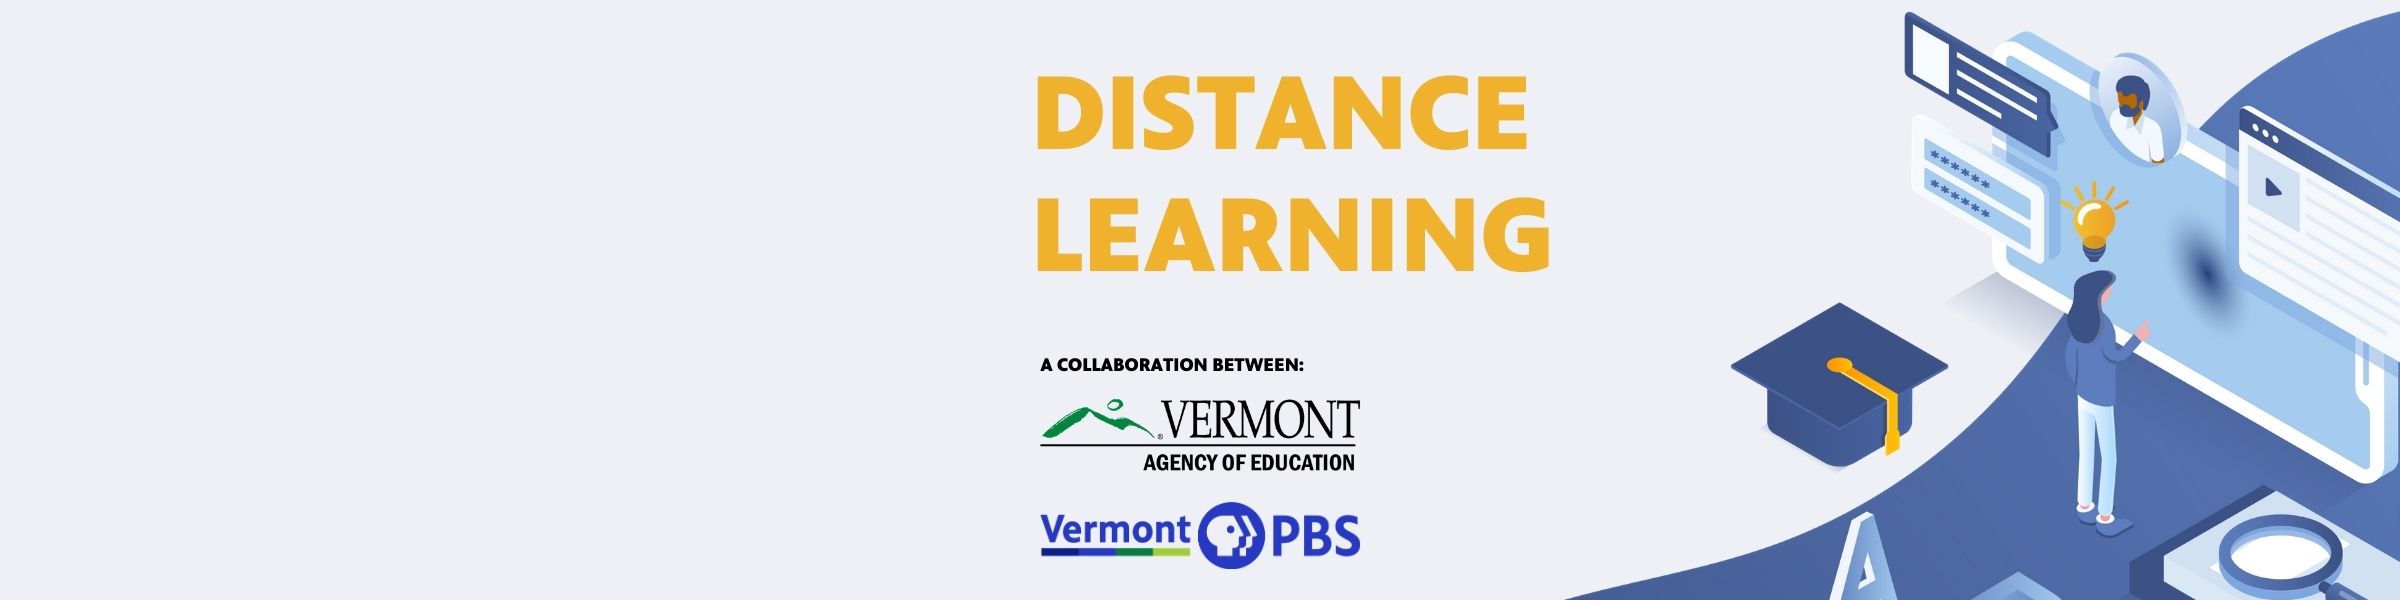 Distance Learning: A collaboration between Vermont Agency of Education and Vermont PBS